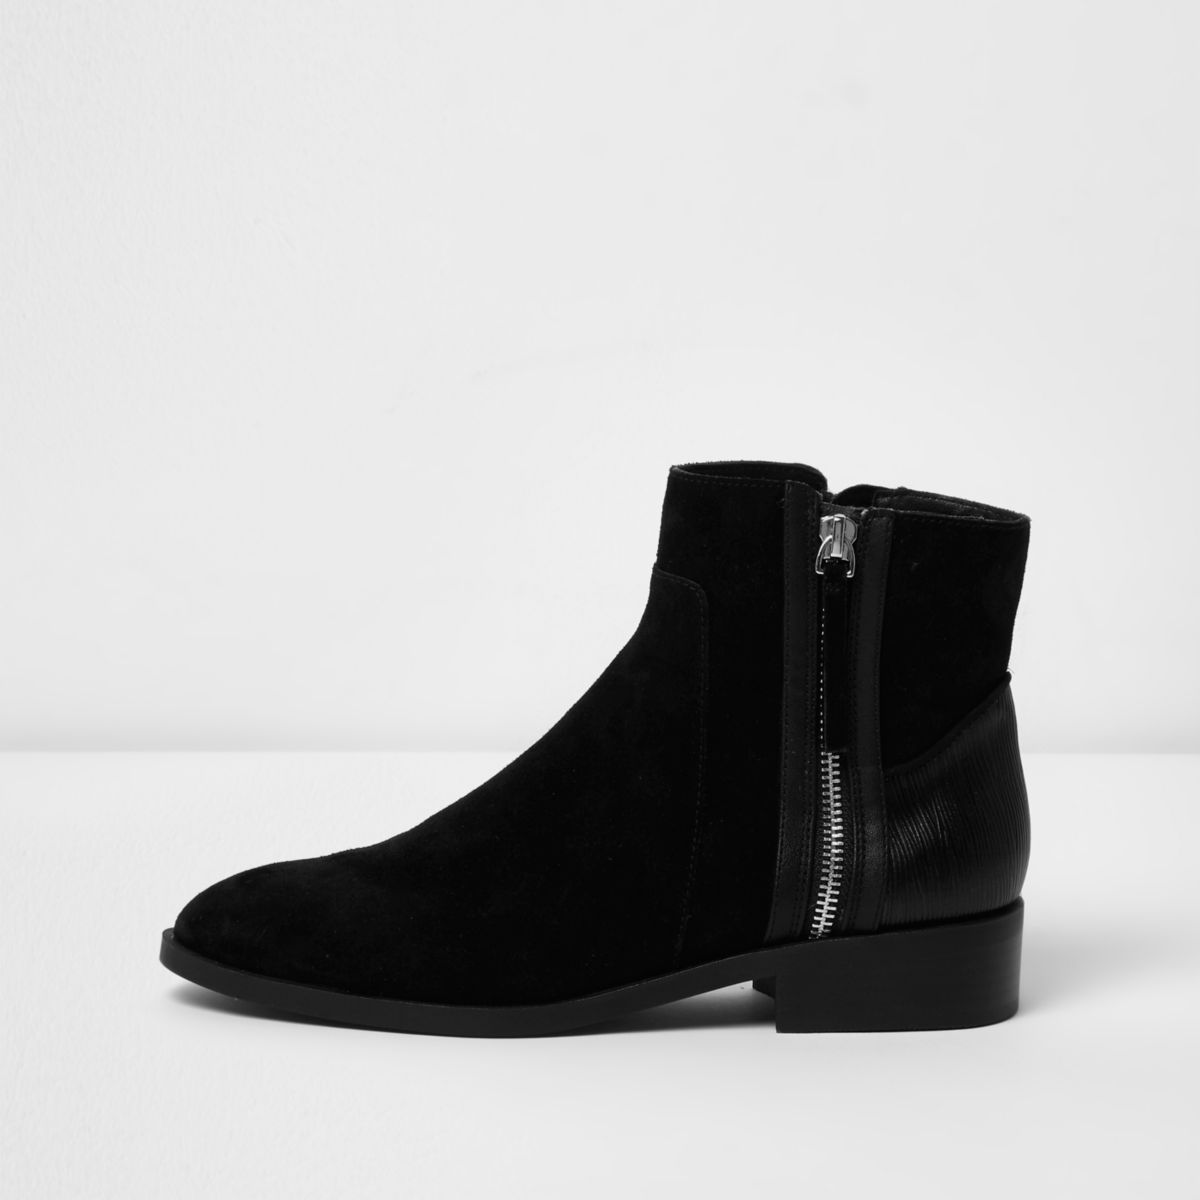 River Island Womens Black suede zip side ankle | Bluewater | £20.00